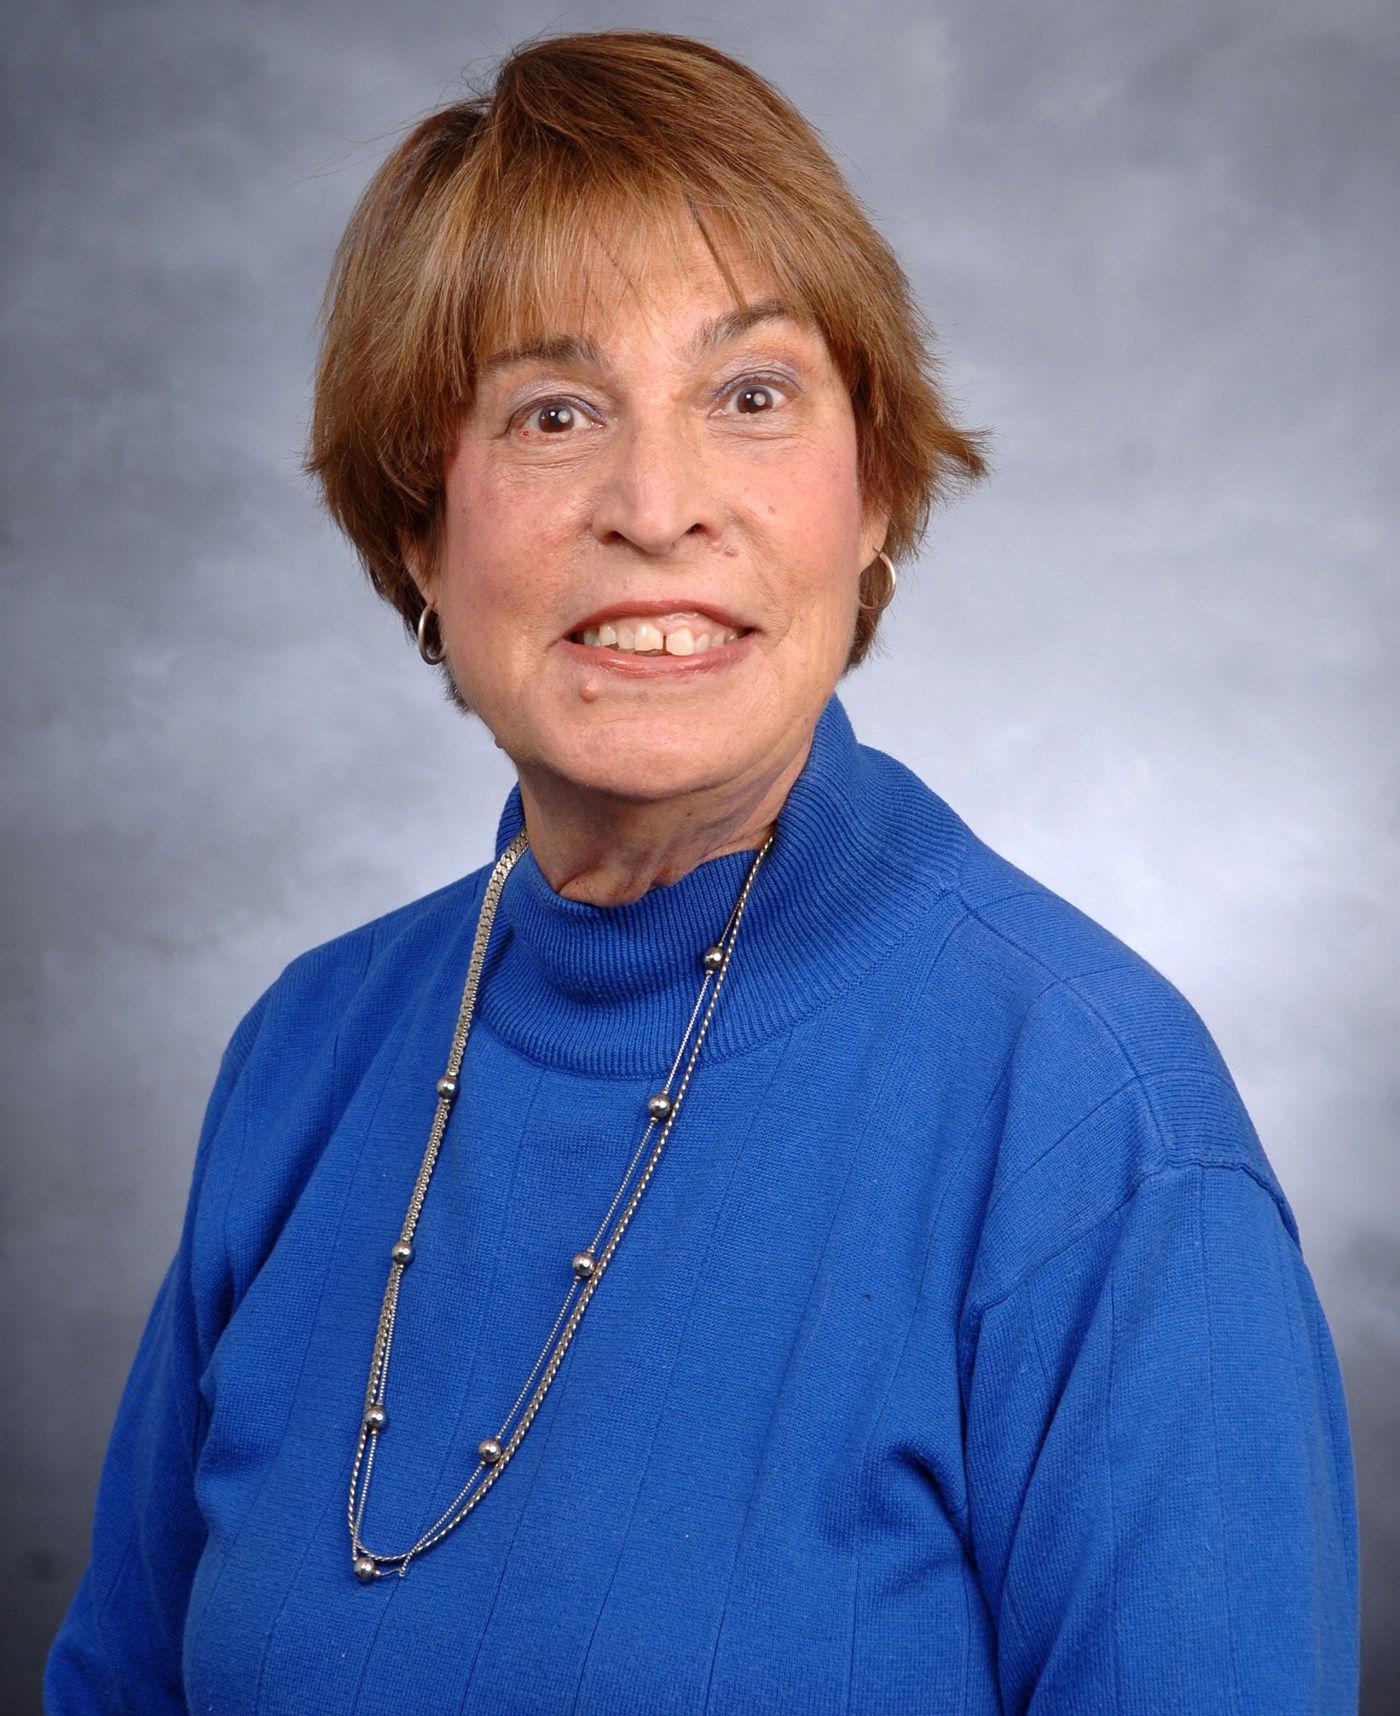 Shellie Simons is an Associate Professor in the Susan and Alan Solomont School of Nursing at UMass Lowell.